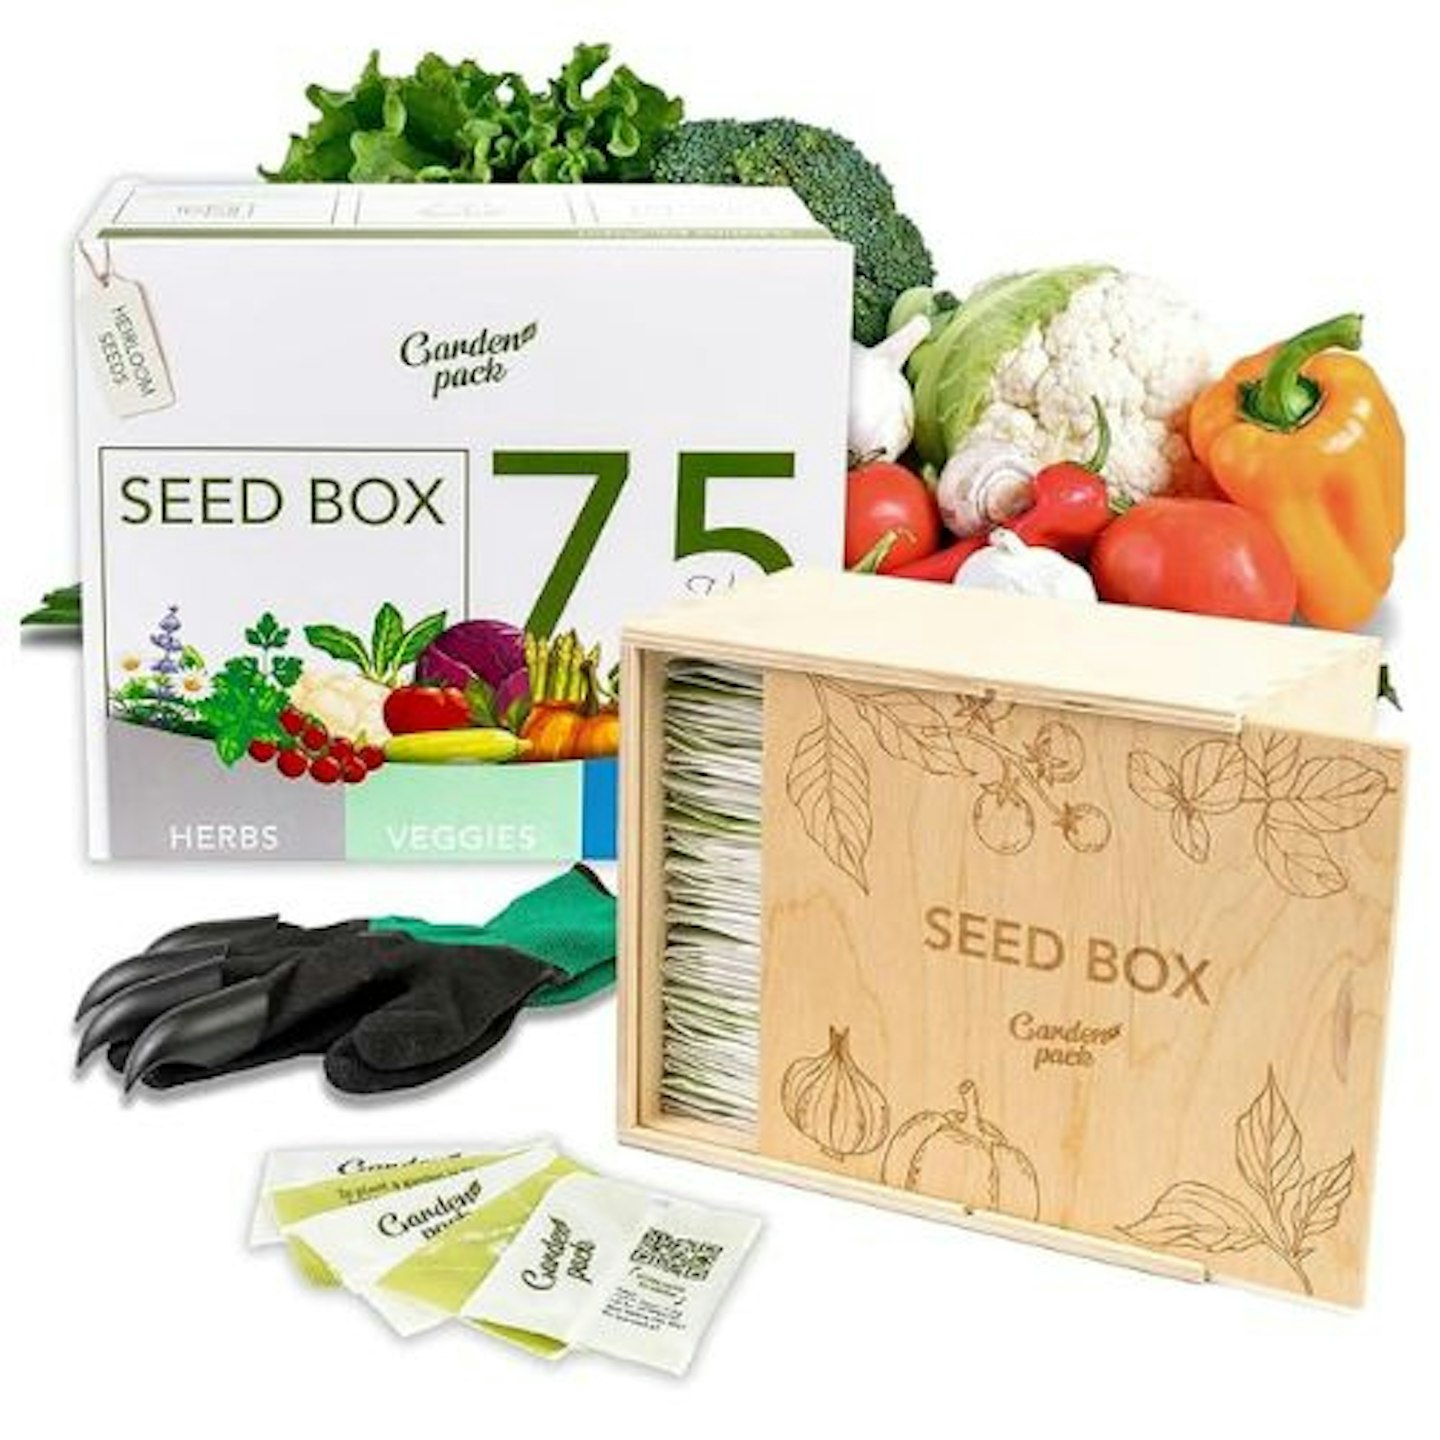 Grow Your Own Seed Box by Garden Pack